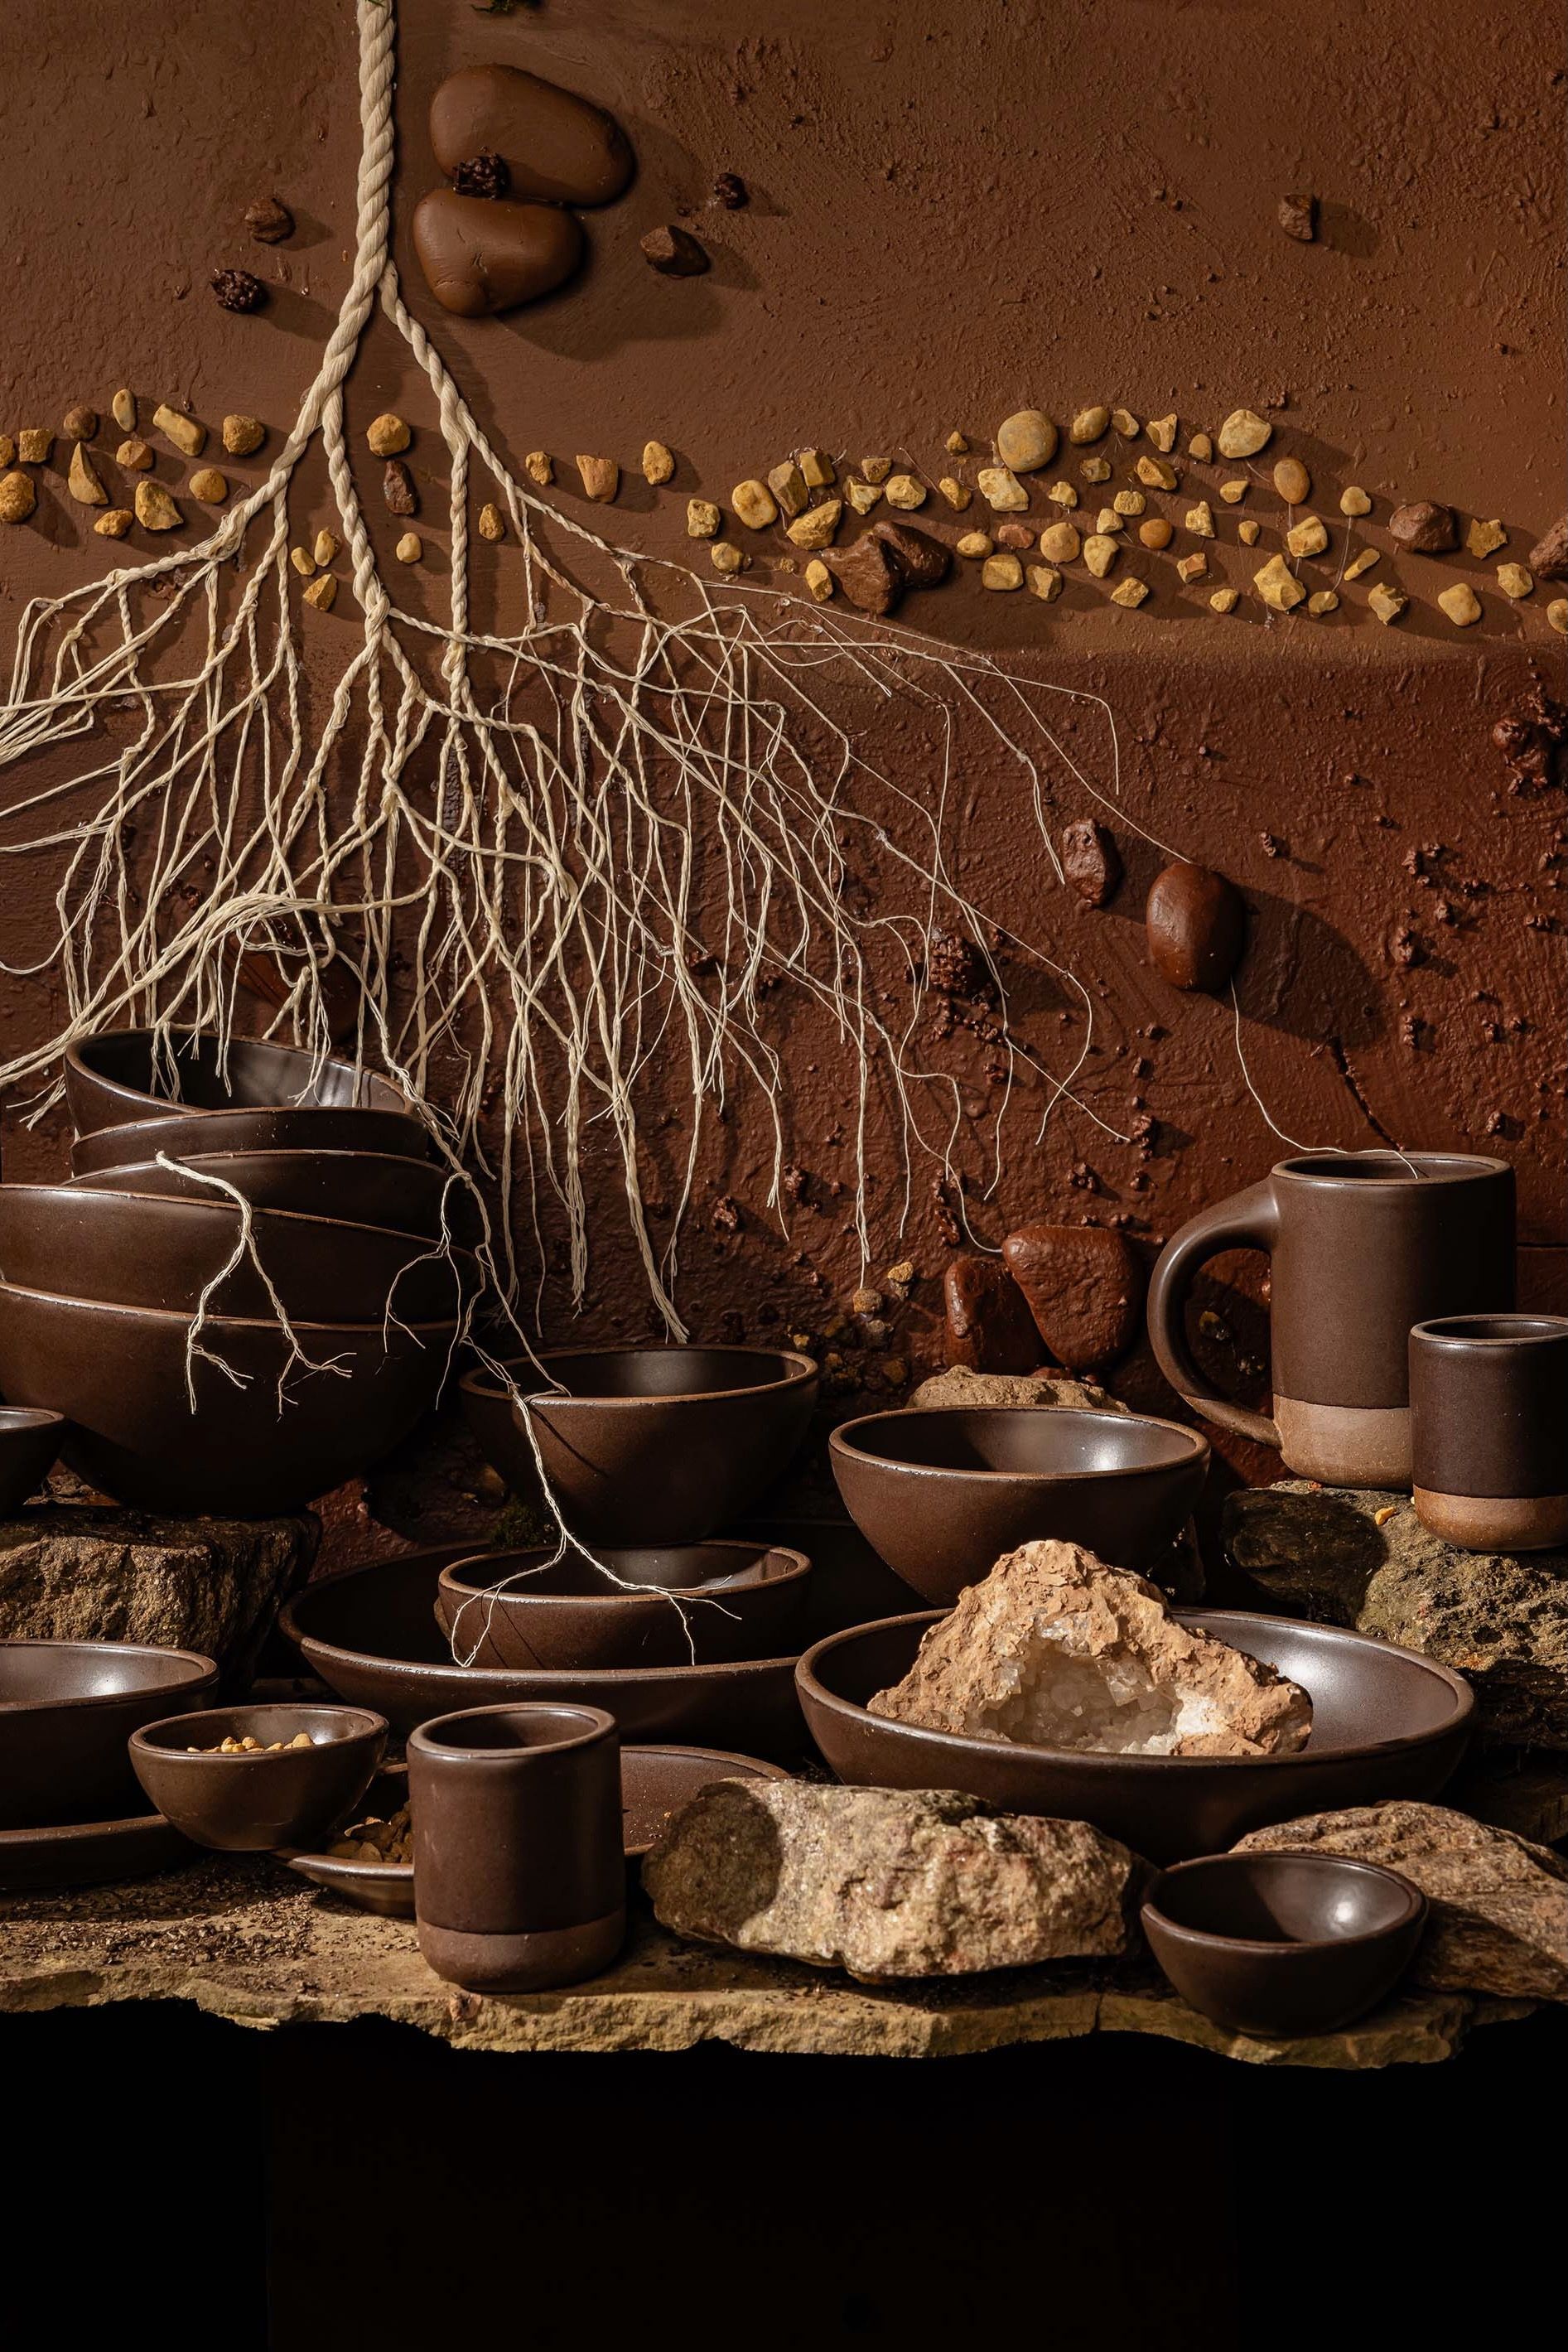 Earthy ground environment with tree roots, rocks, and dirt with various plates and bowls in a dark brown. 